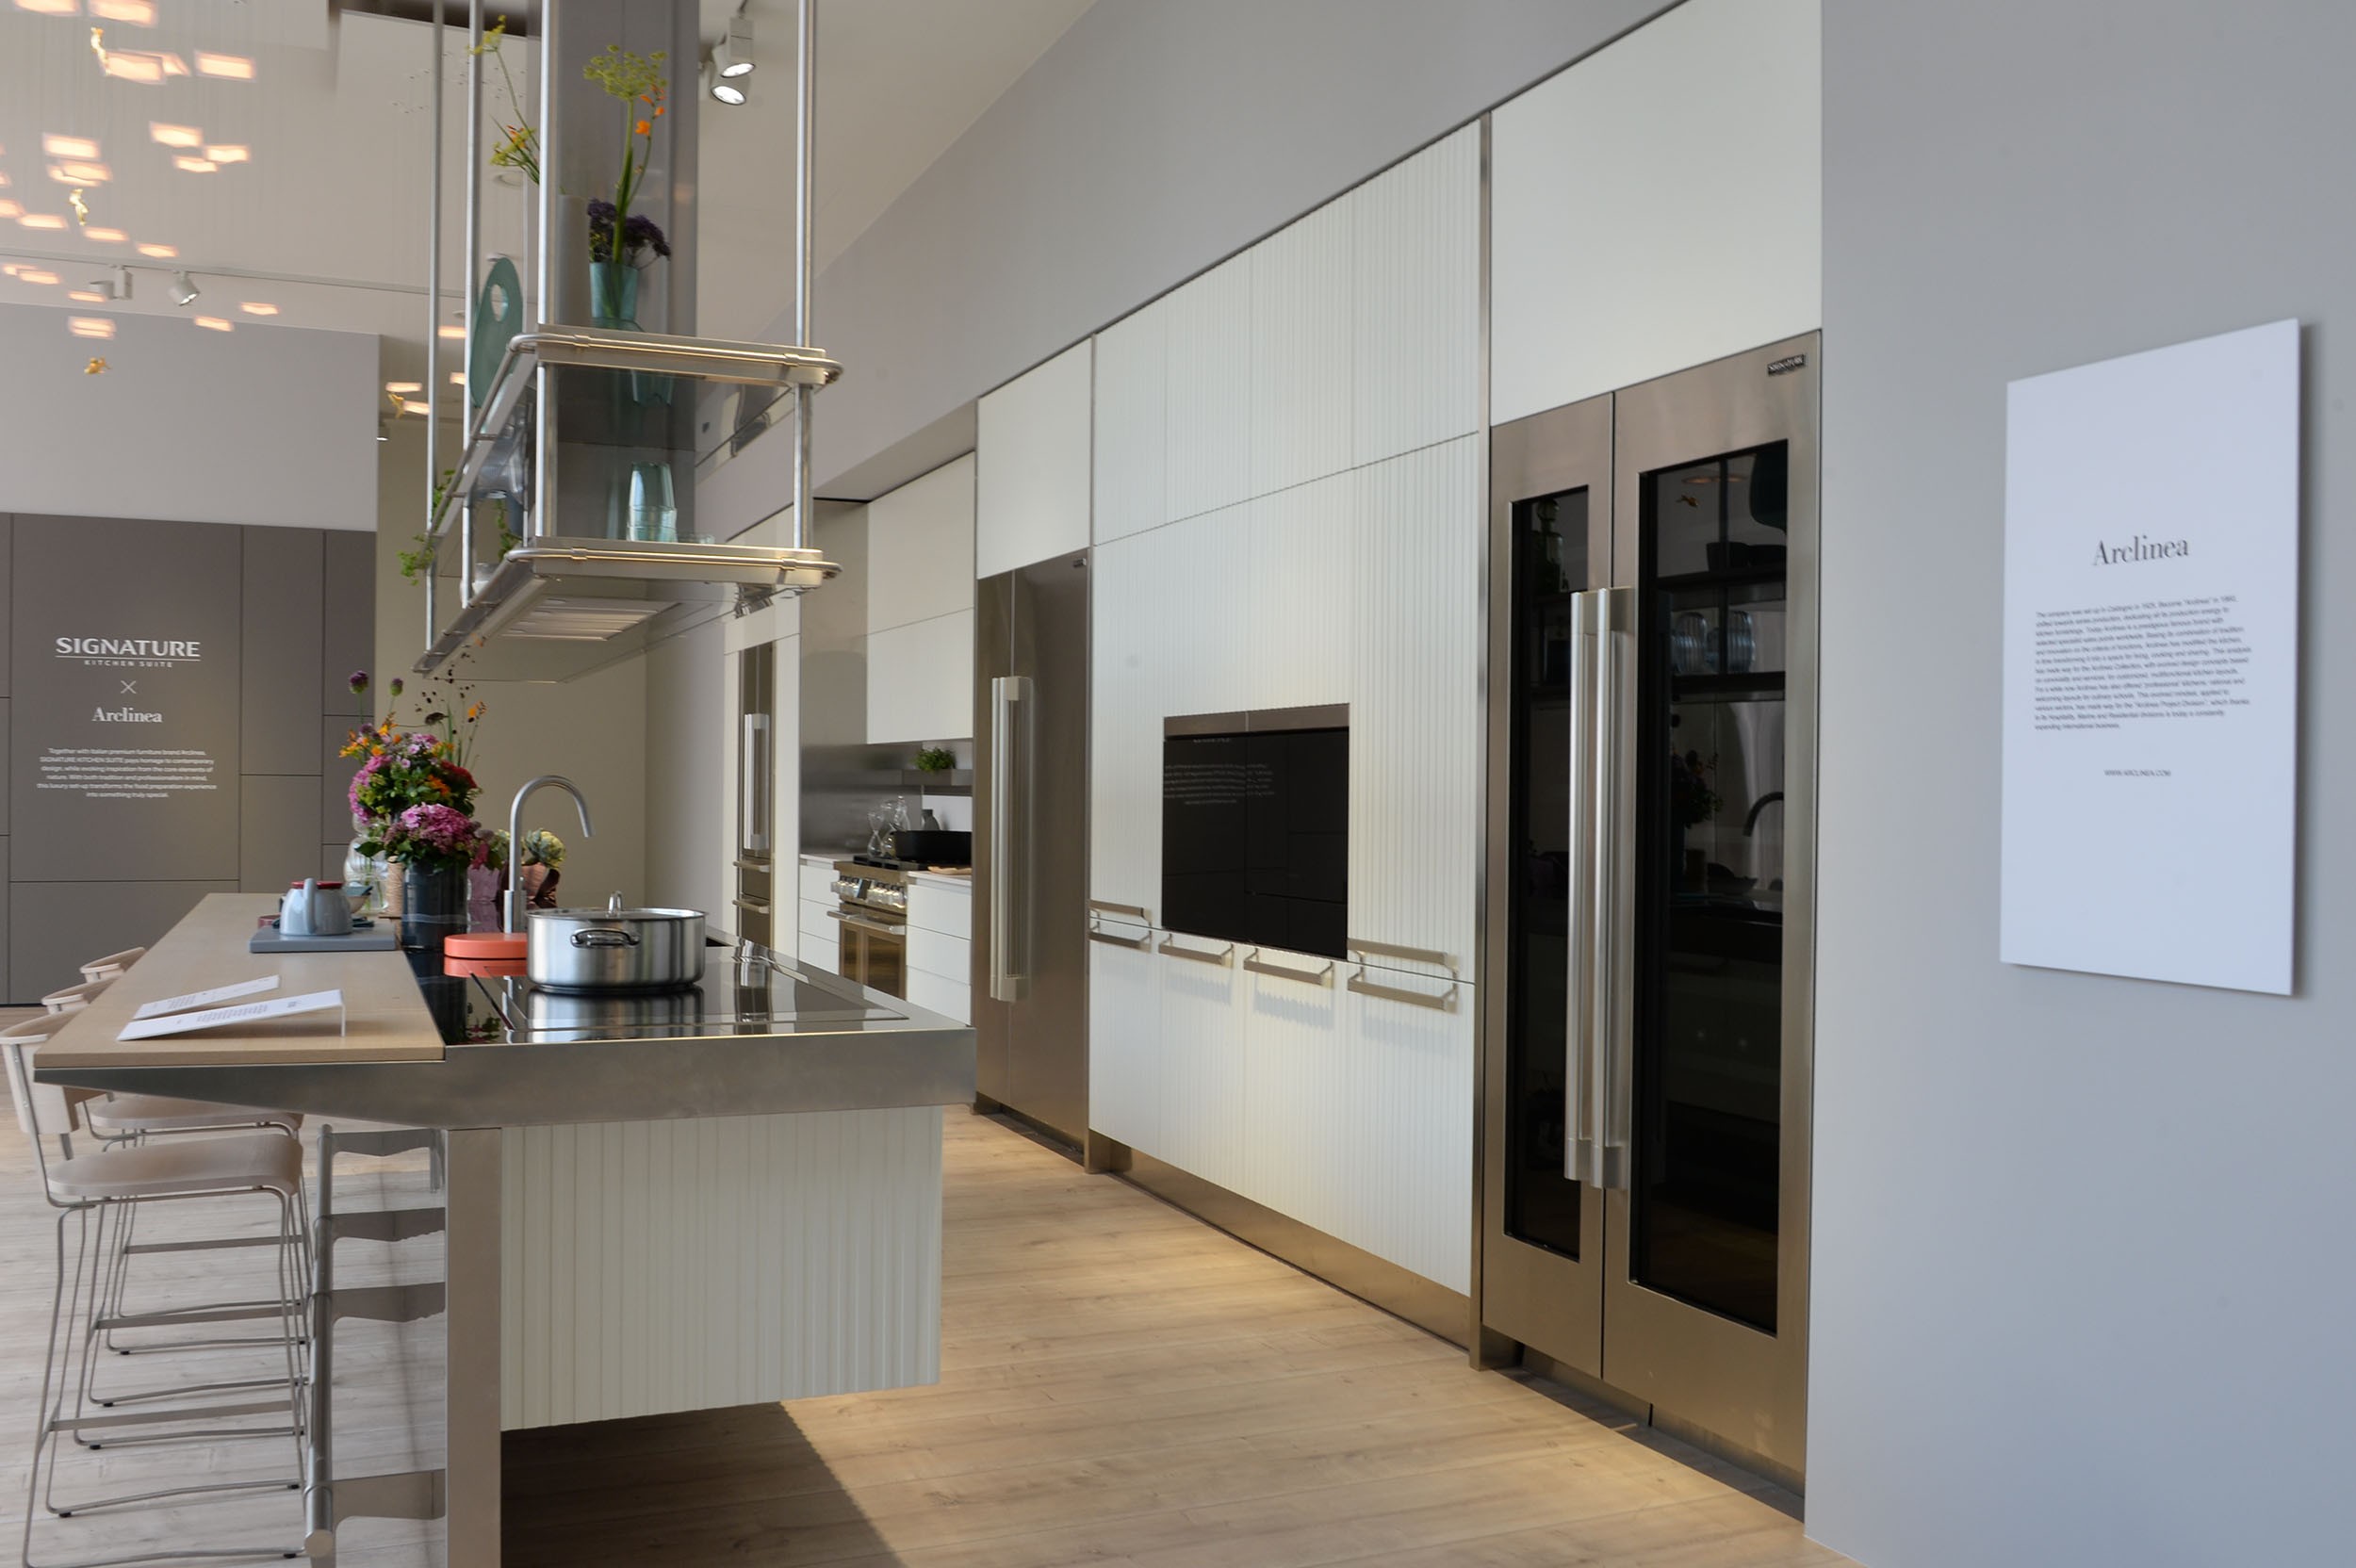 Portion of SIGNATURE KITCHEN SUITE’s exhibition hall cooperated with Arclinea at IFA 2018